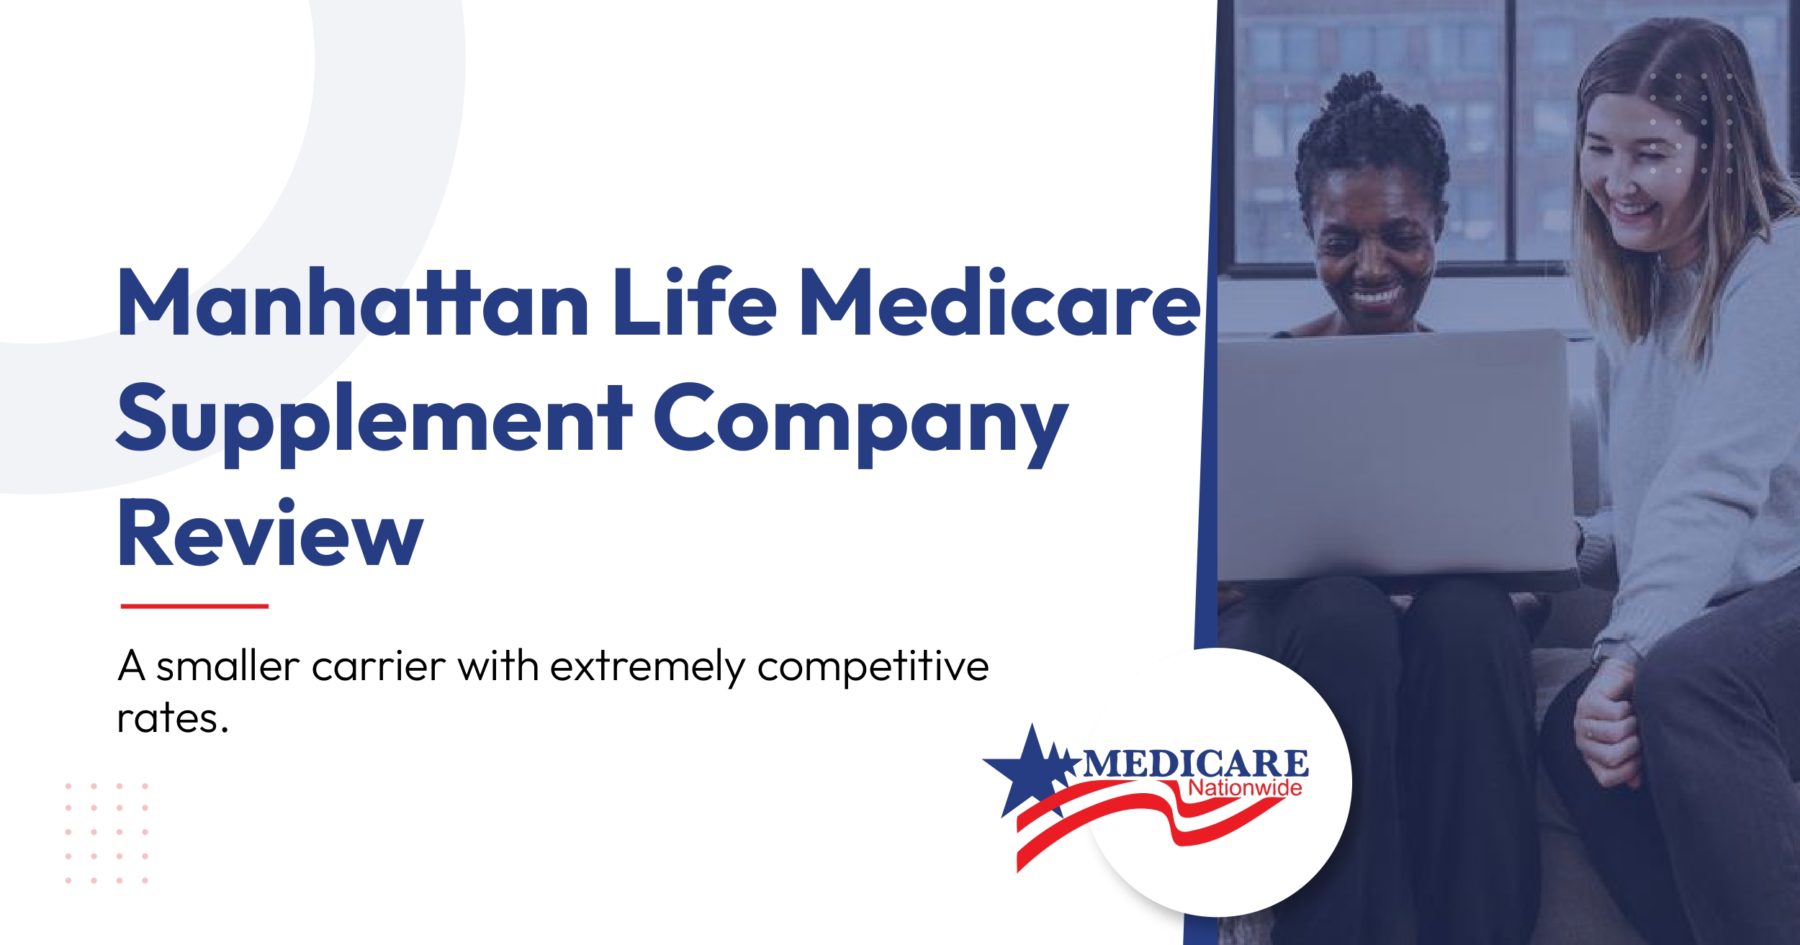 Manhattan Life Medicare Supplement Company Review